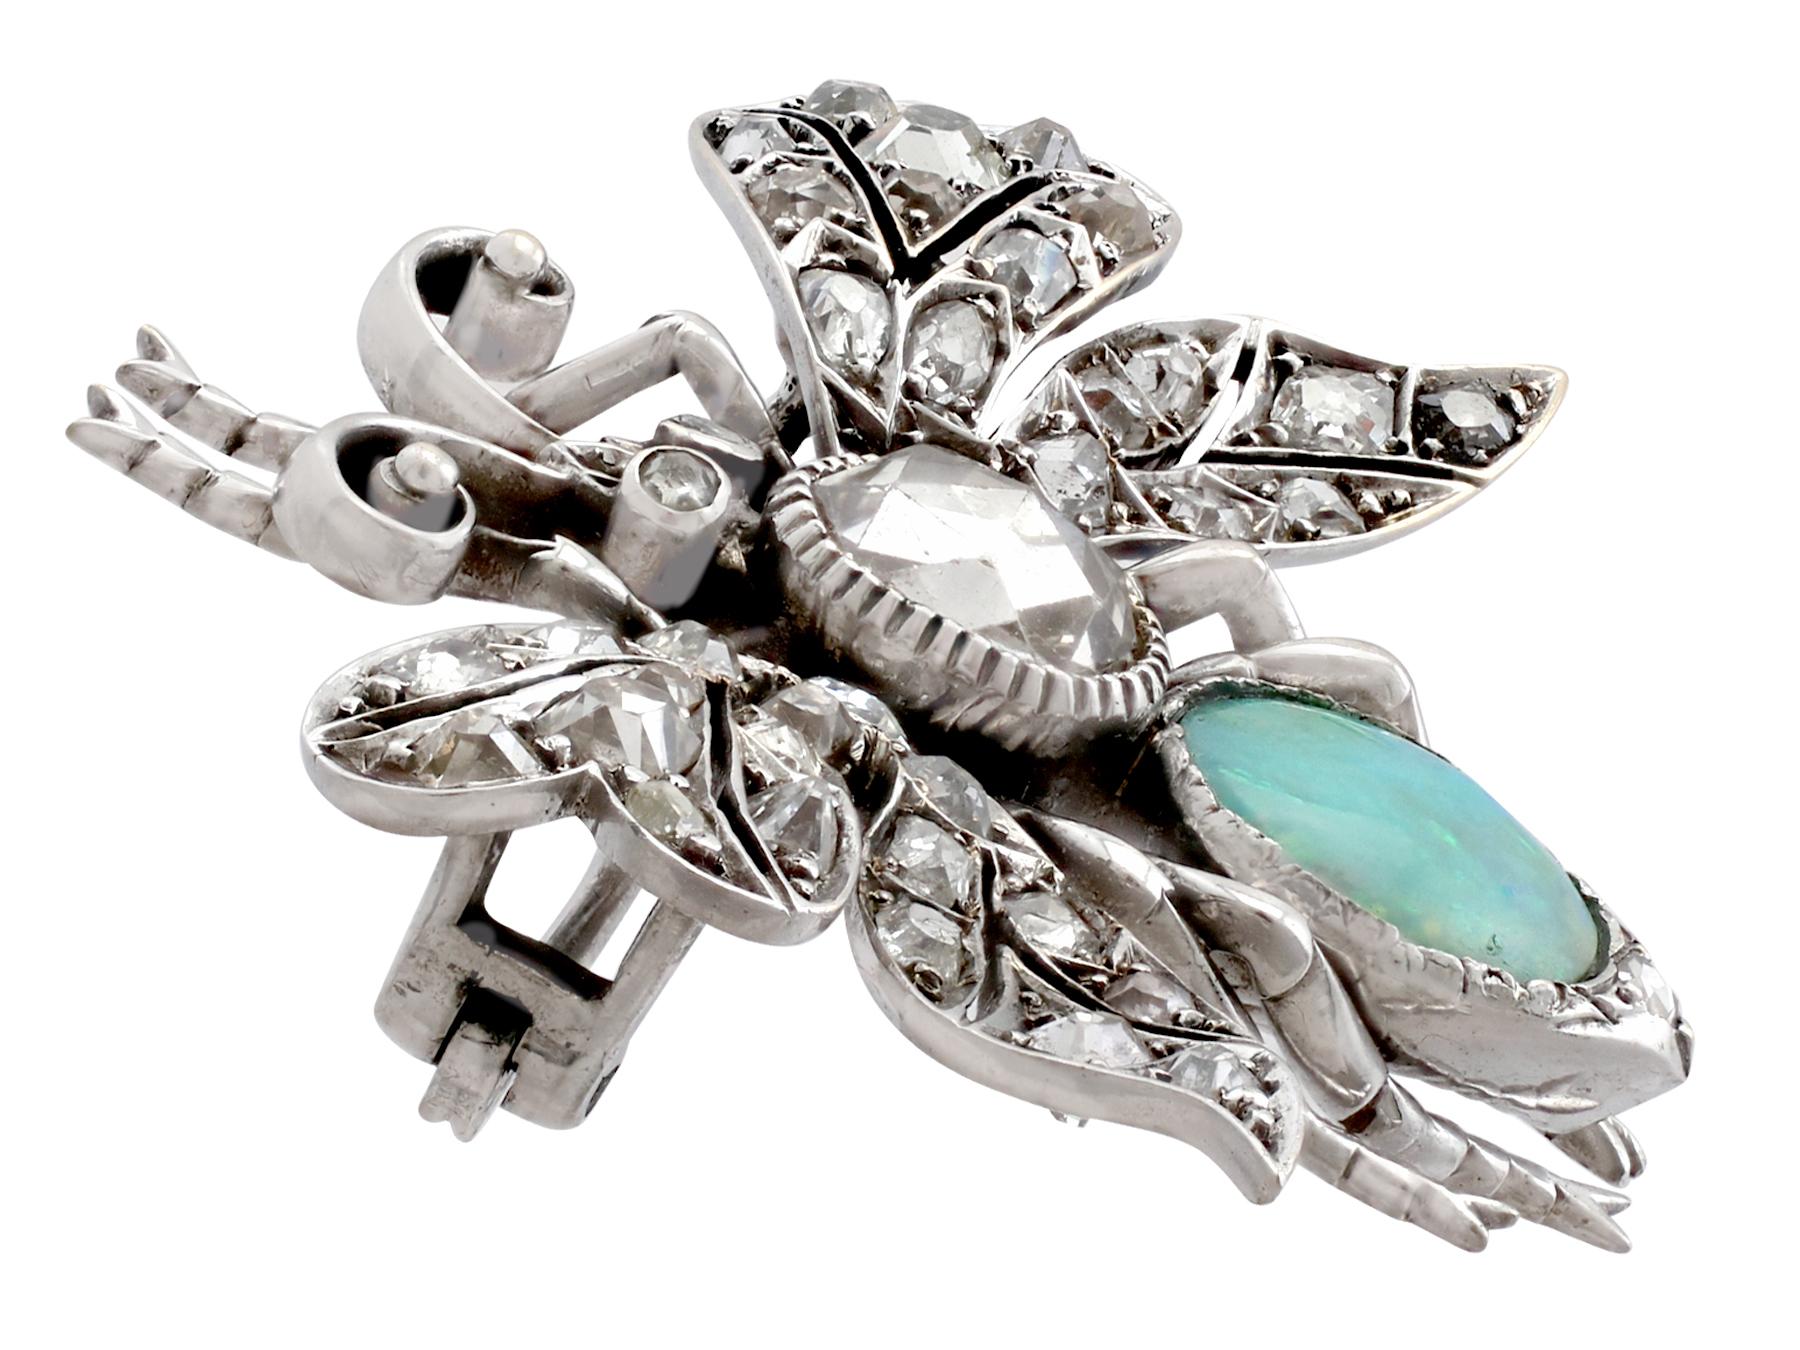 Victorian Antique 2.53 Carat Diamond and Opal Insect Brooch